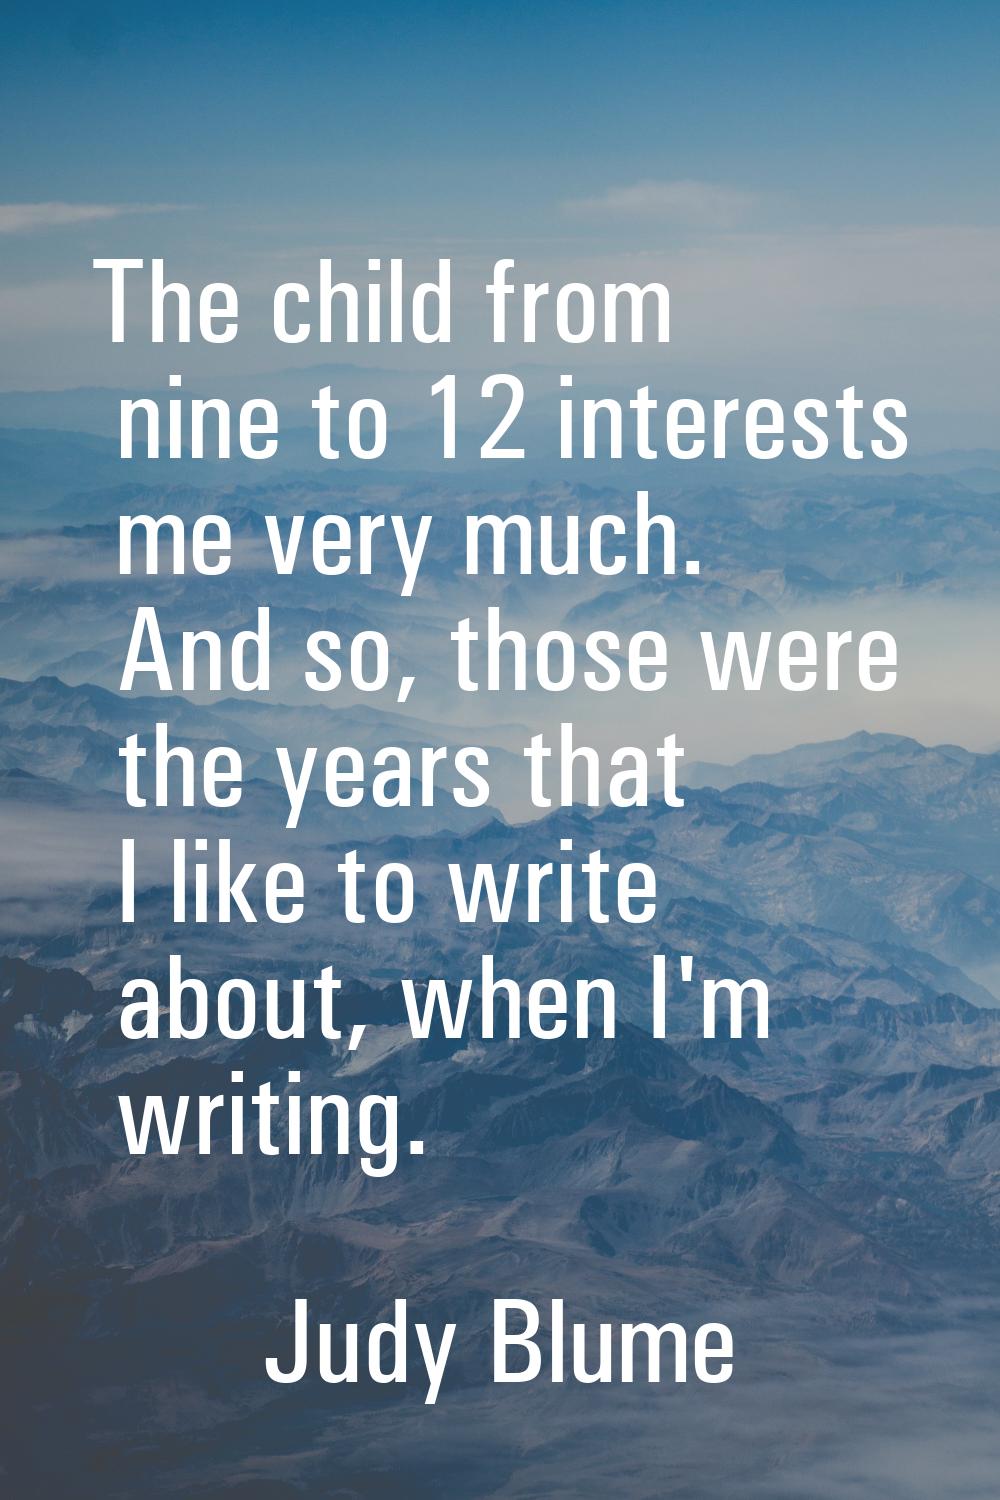 The child from nine to 12 interests me very much. And so, those were the years that I like to write